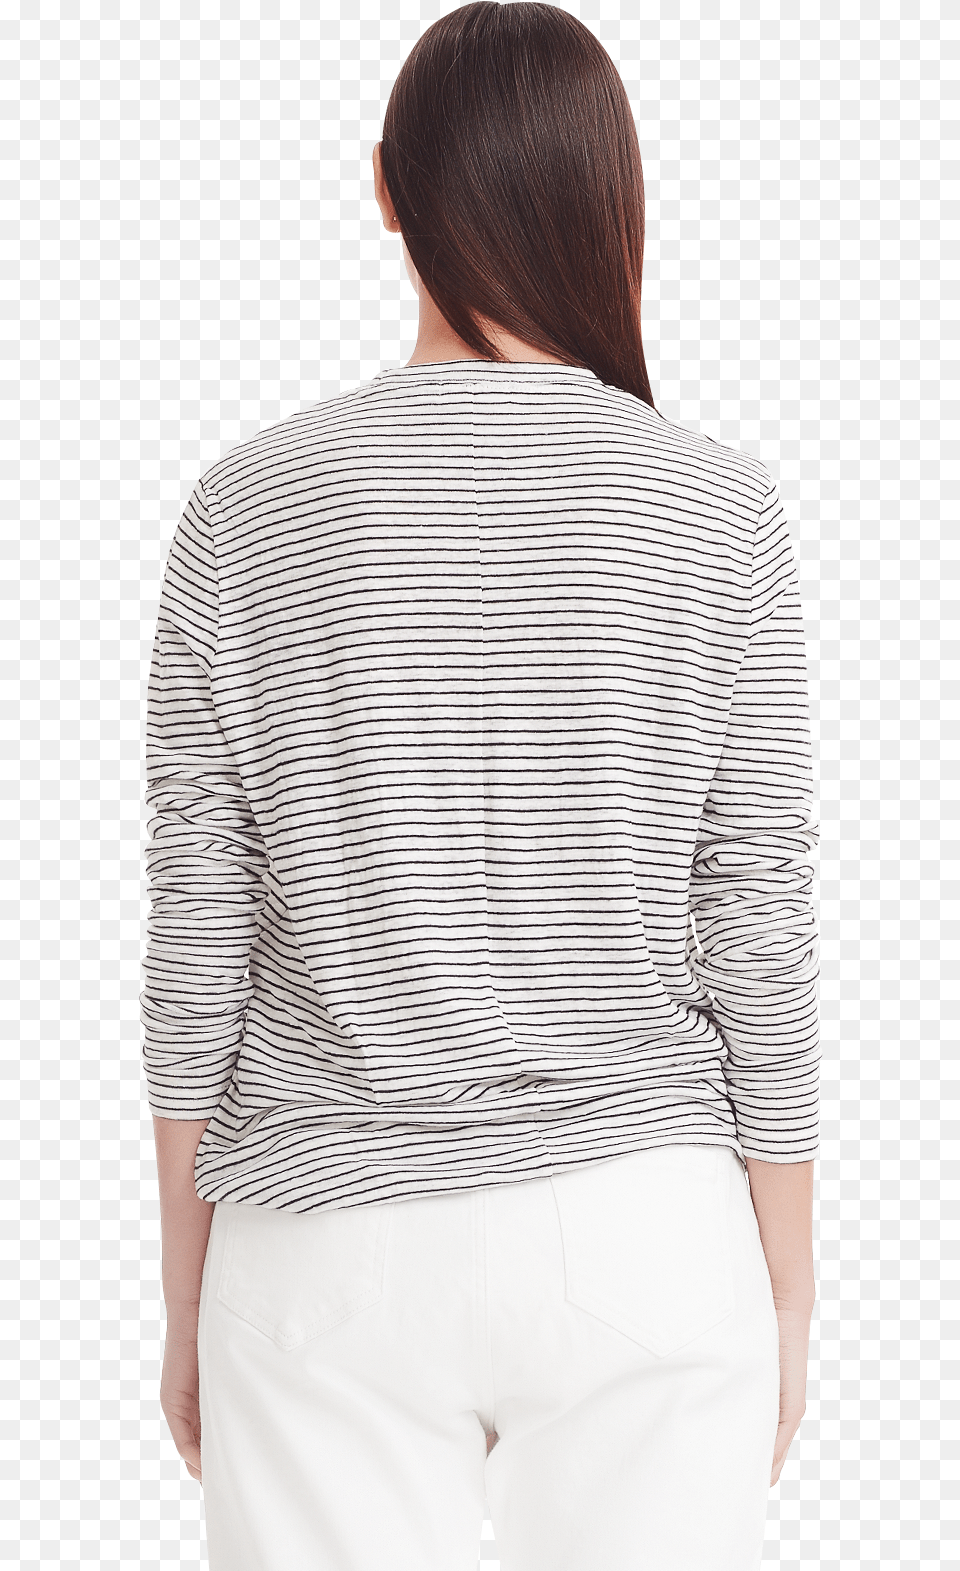 Luxe Linen Ls Tee Blackwhite Stripe, Adult, Sleeve, Person, Man Png Image